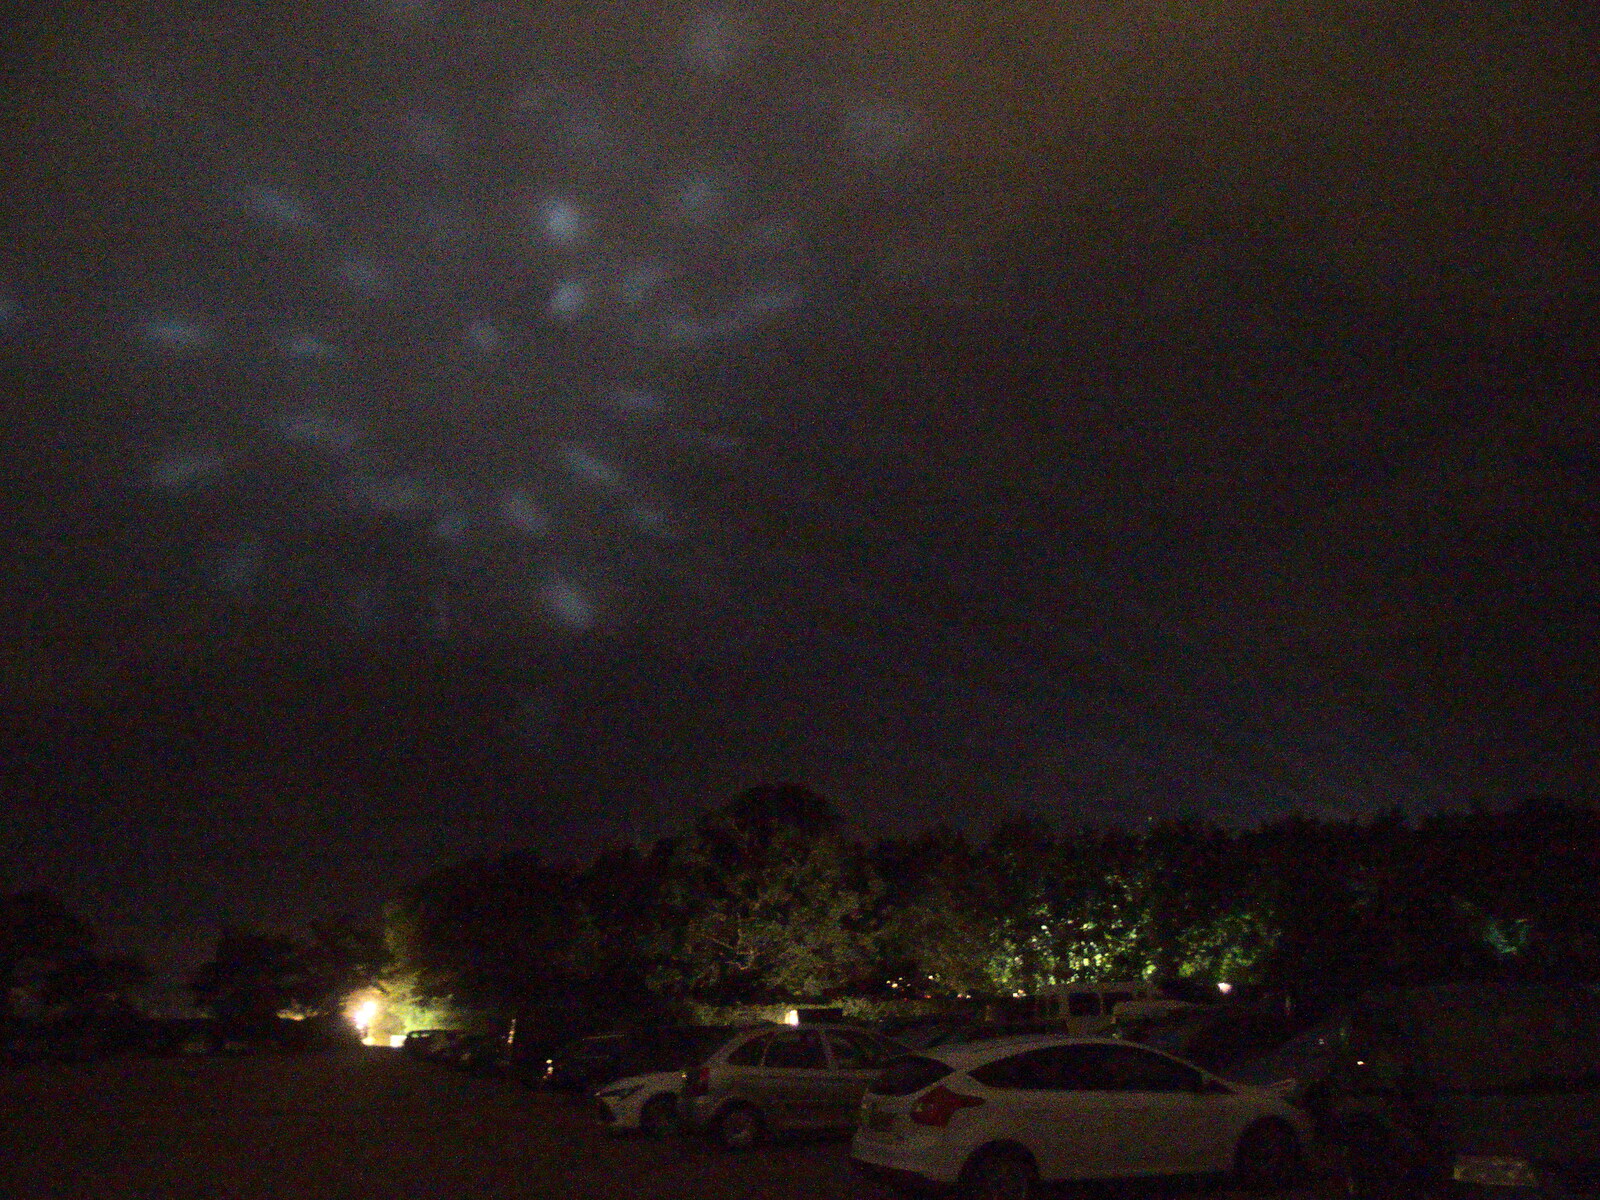 Lights reflect from the bottom of the clouds from Maui Waui Festival, Hill Farm, Gressenhall, Norfolk - 28th August 2021